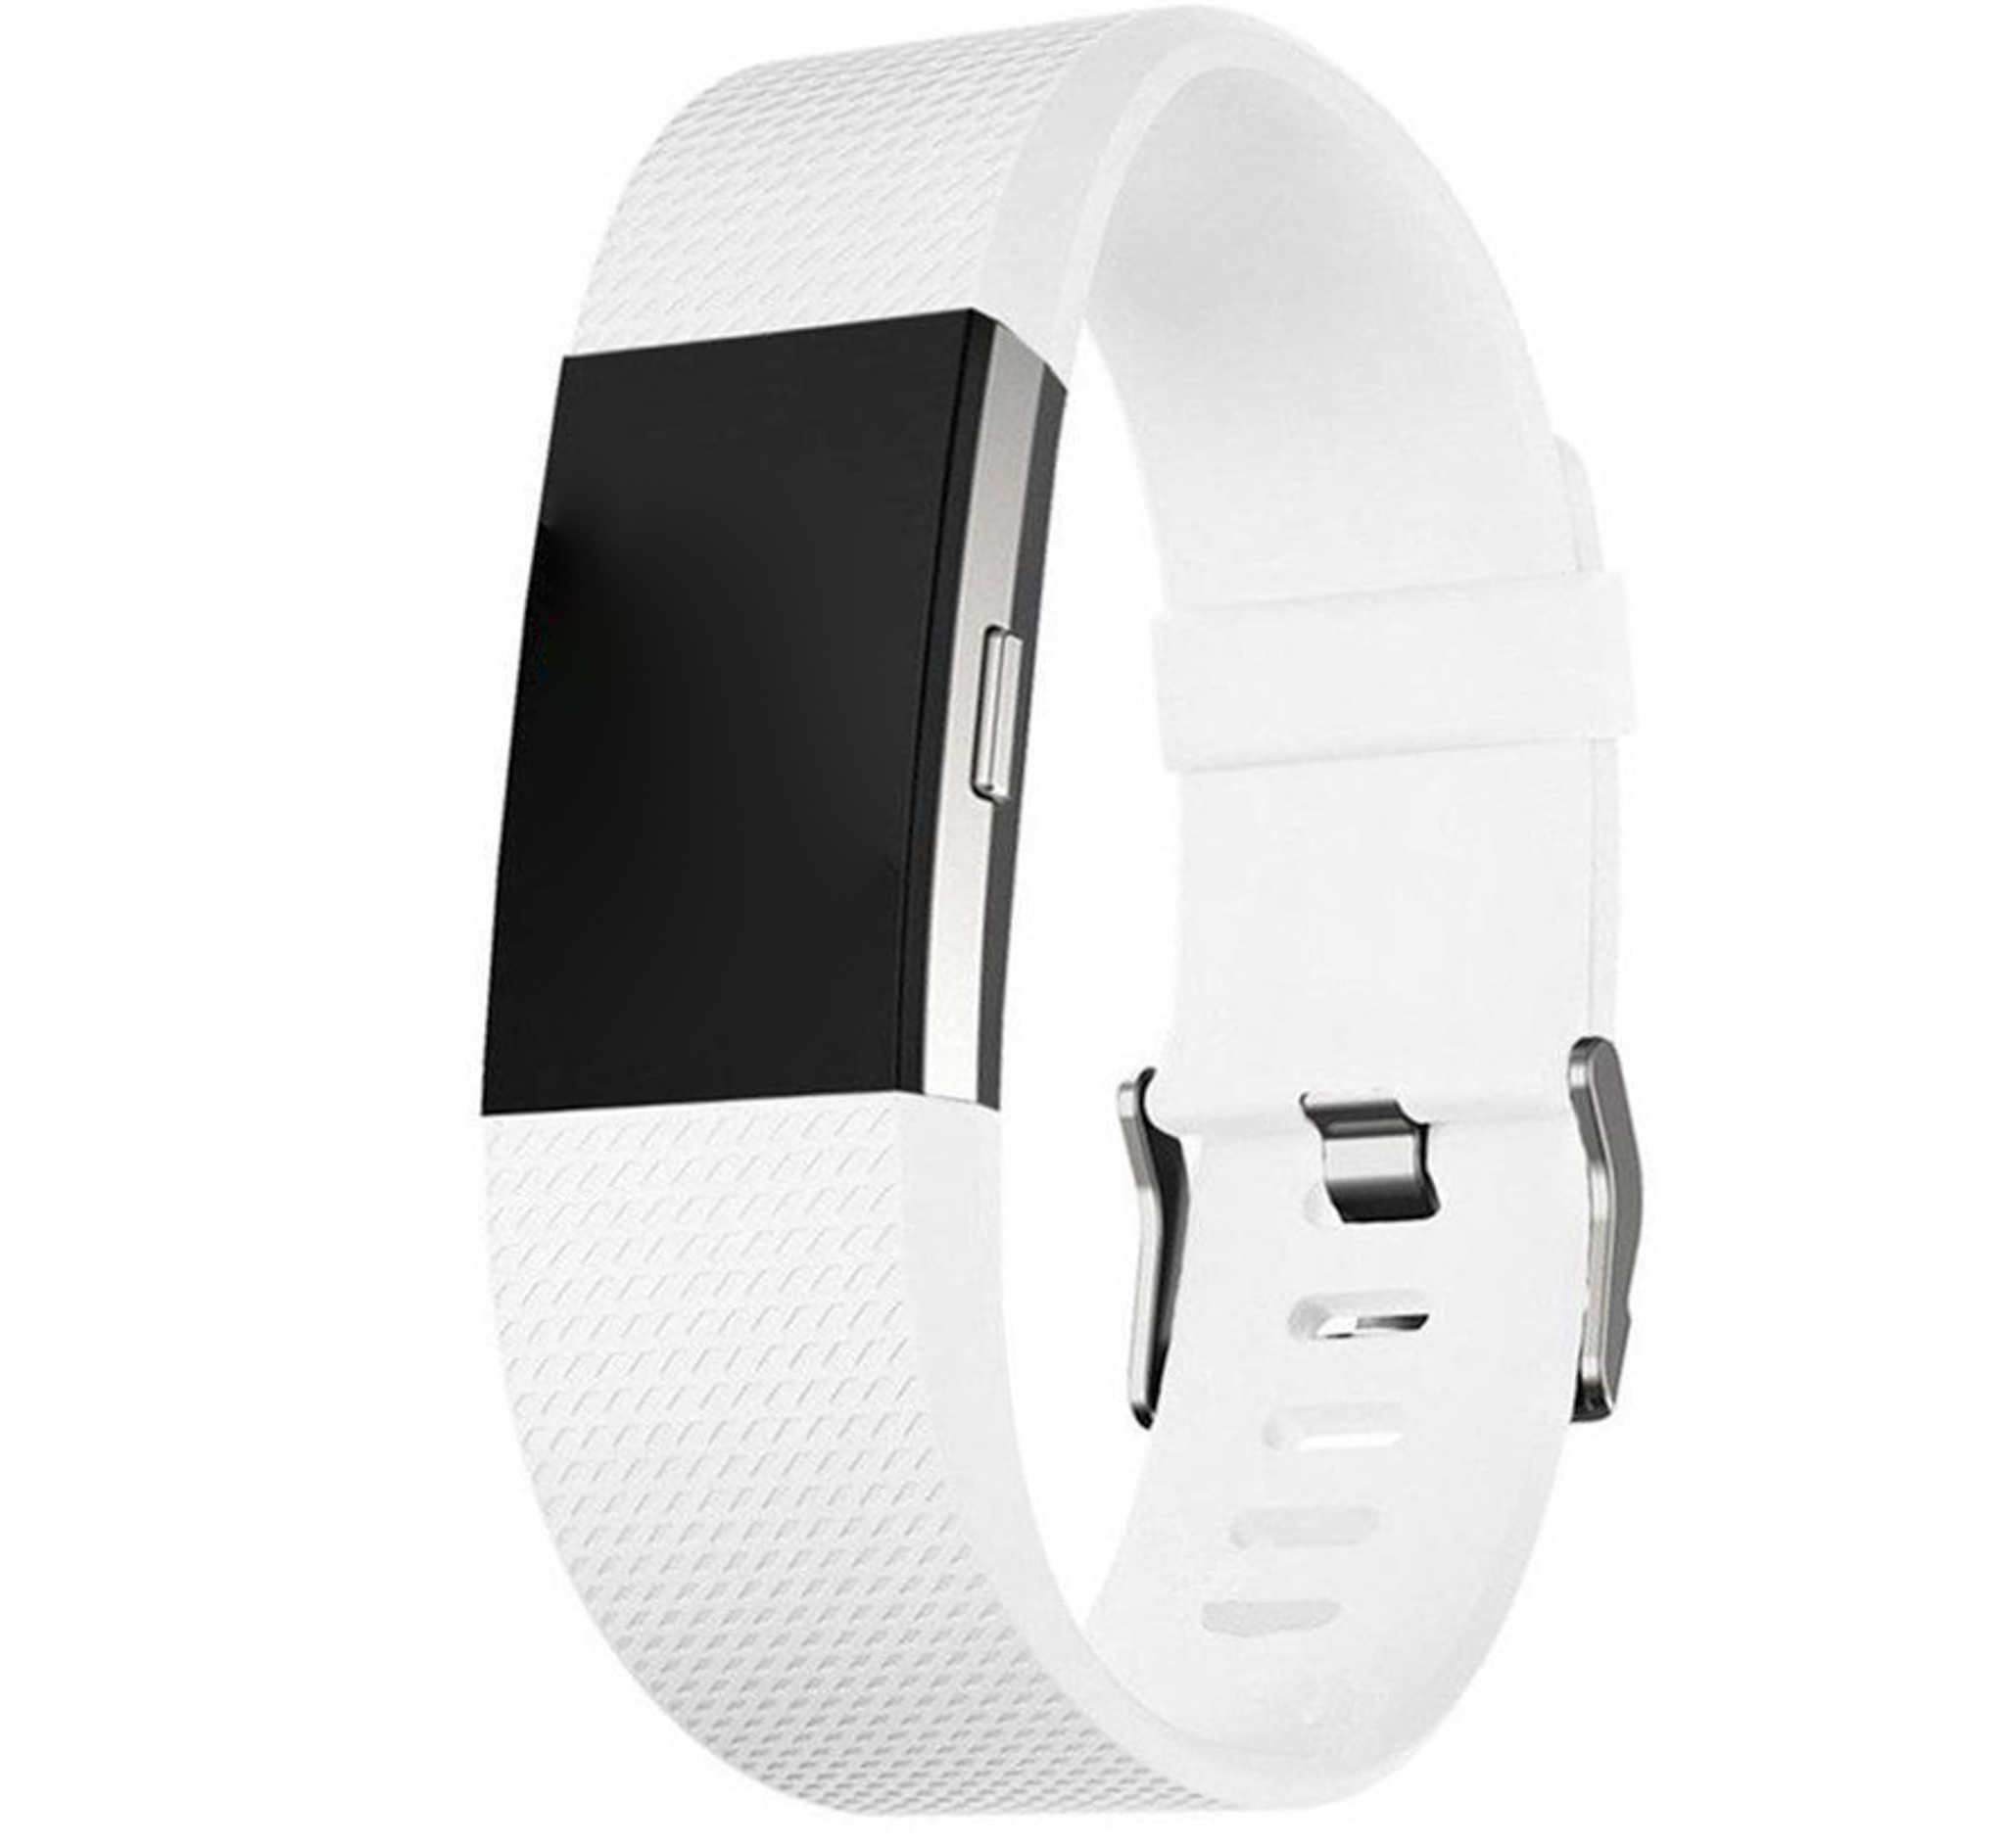 Fitbit Charge 2 Sport Strap - White